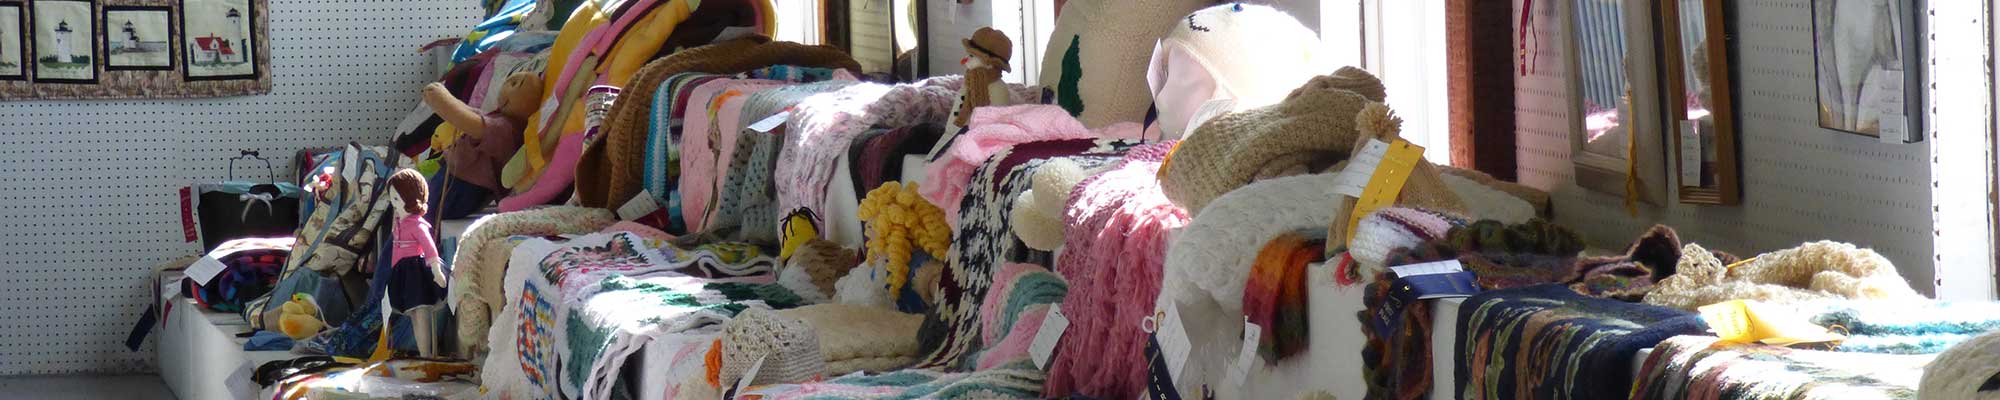 Knitting and Crochet Exhibition | Arts and Crafts